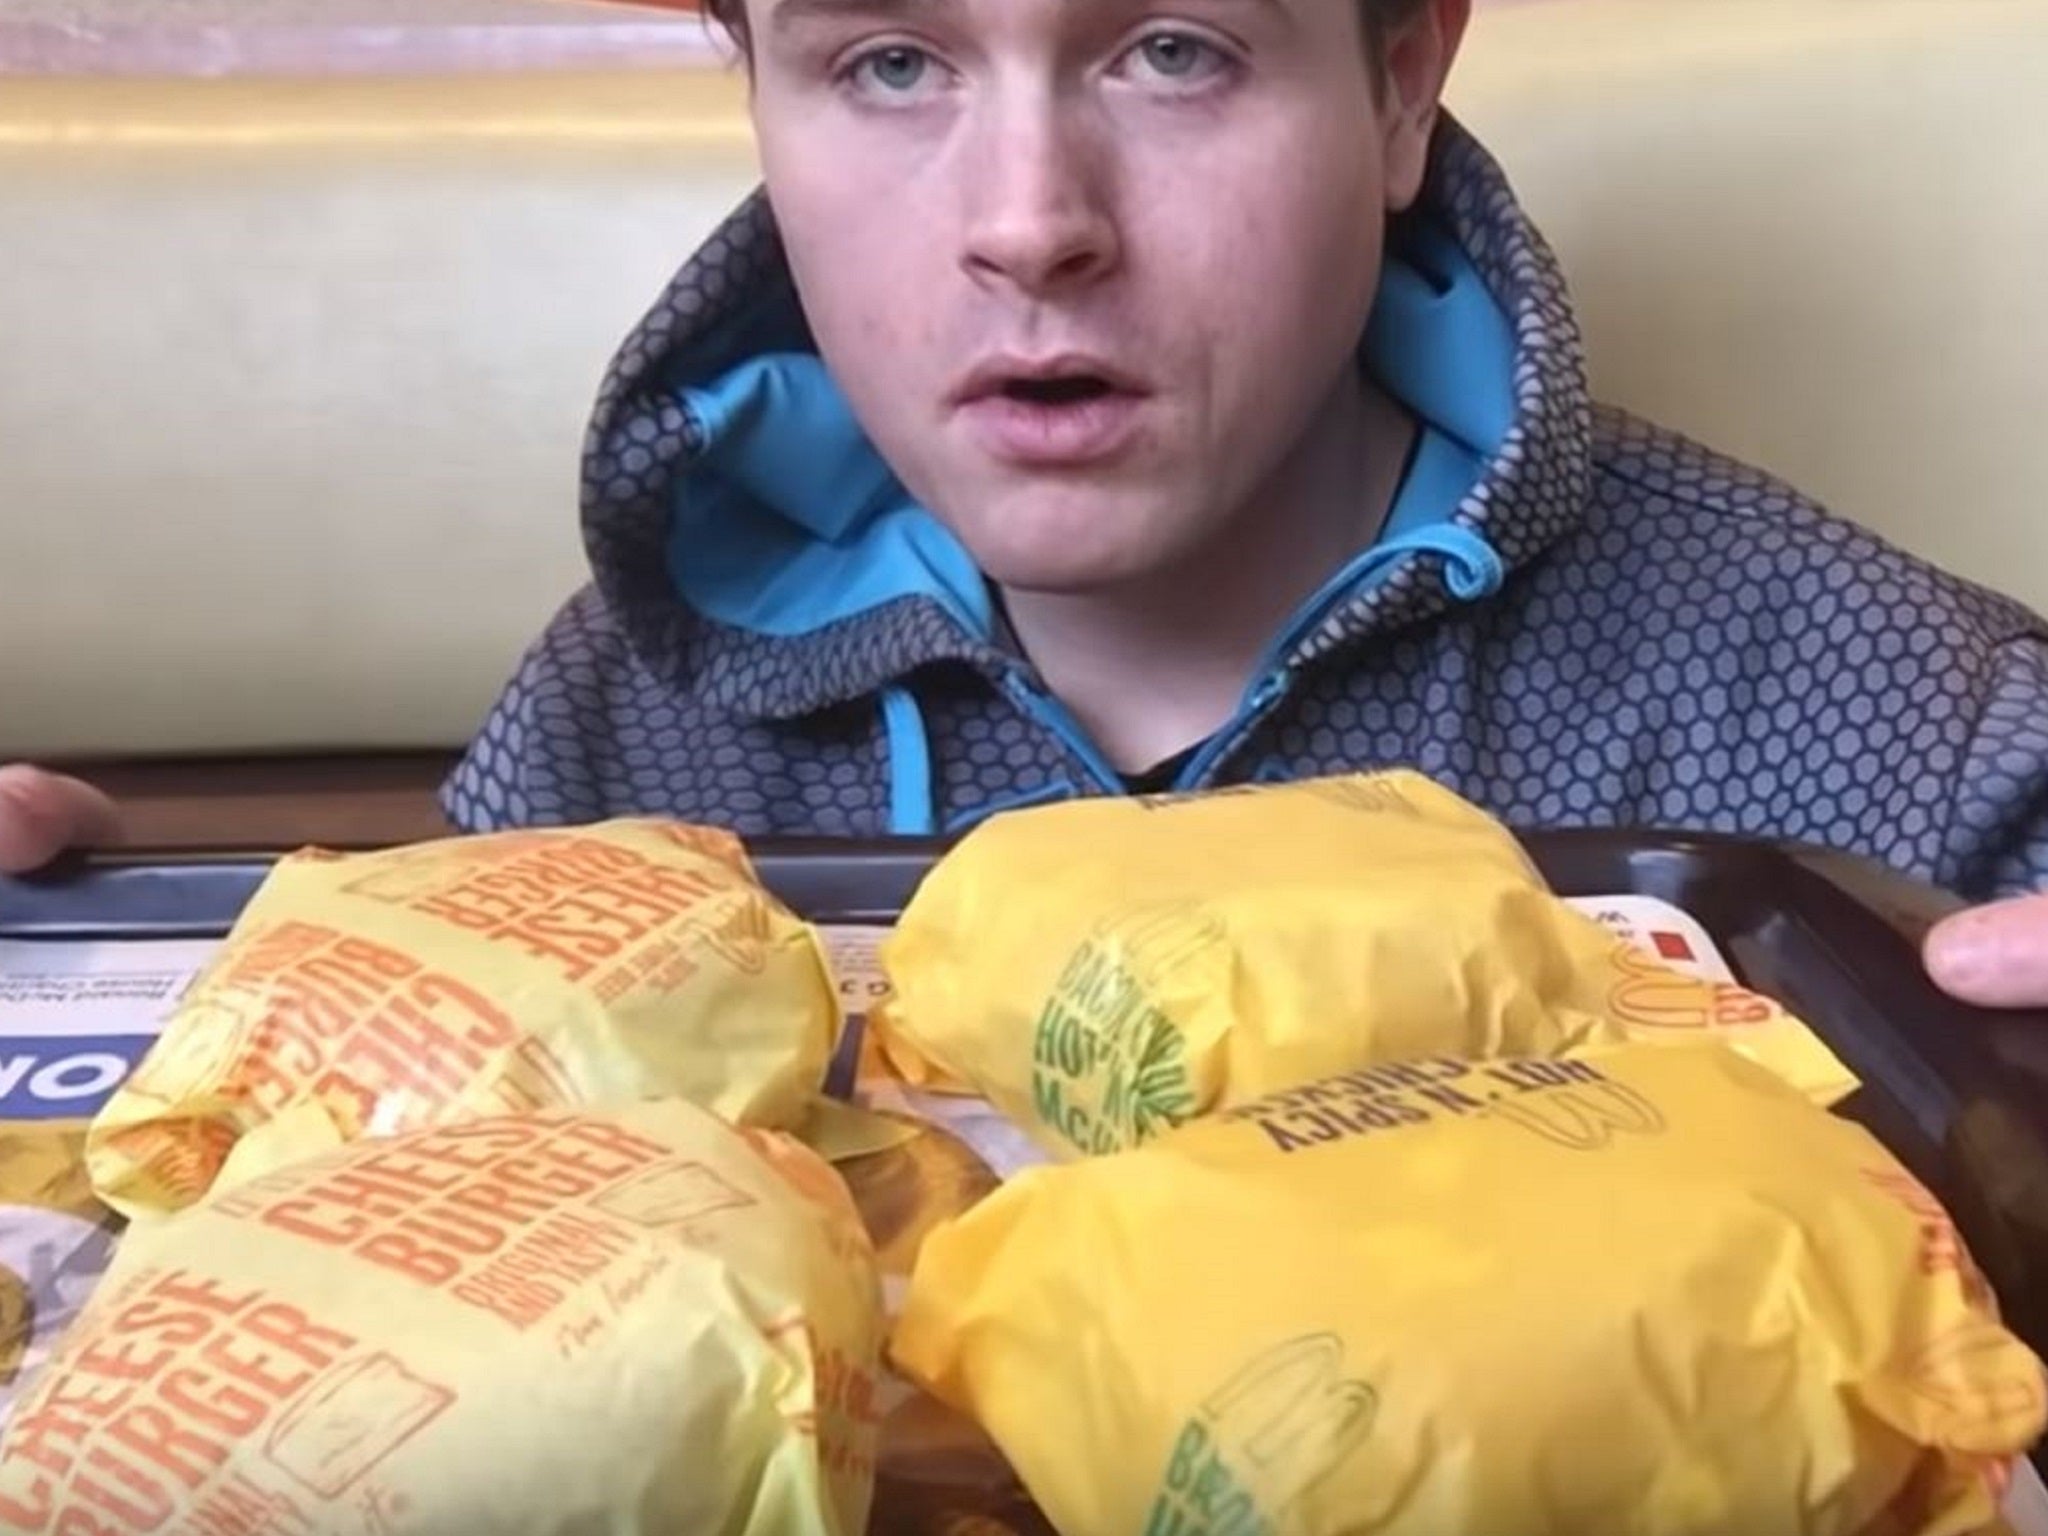 Cleary pictured during a review of a McDonald’s meal uploaded to his YouTube channel on 19 January – the same day he was arrested